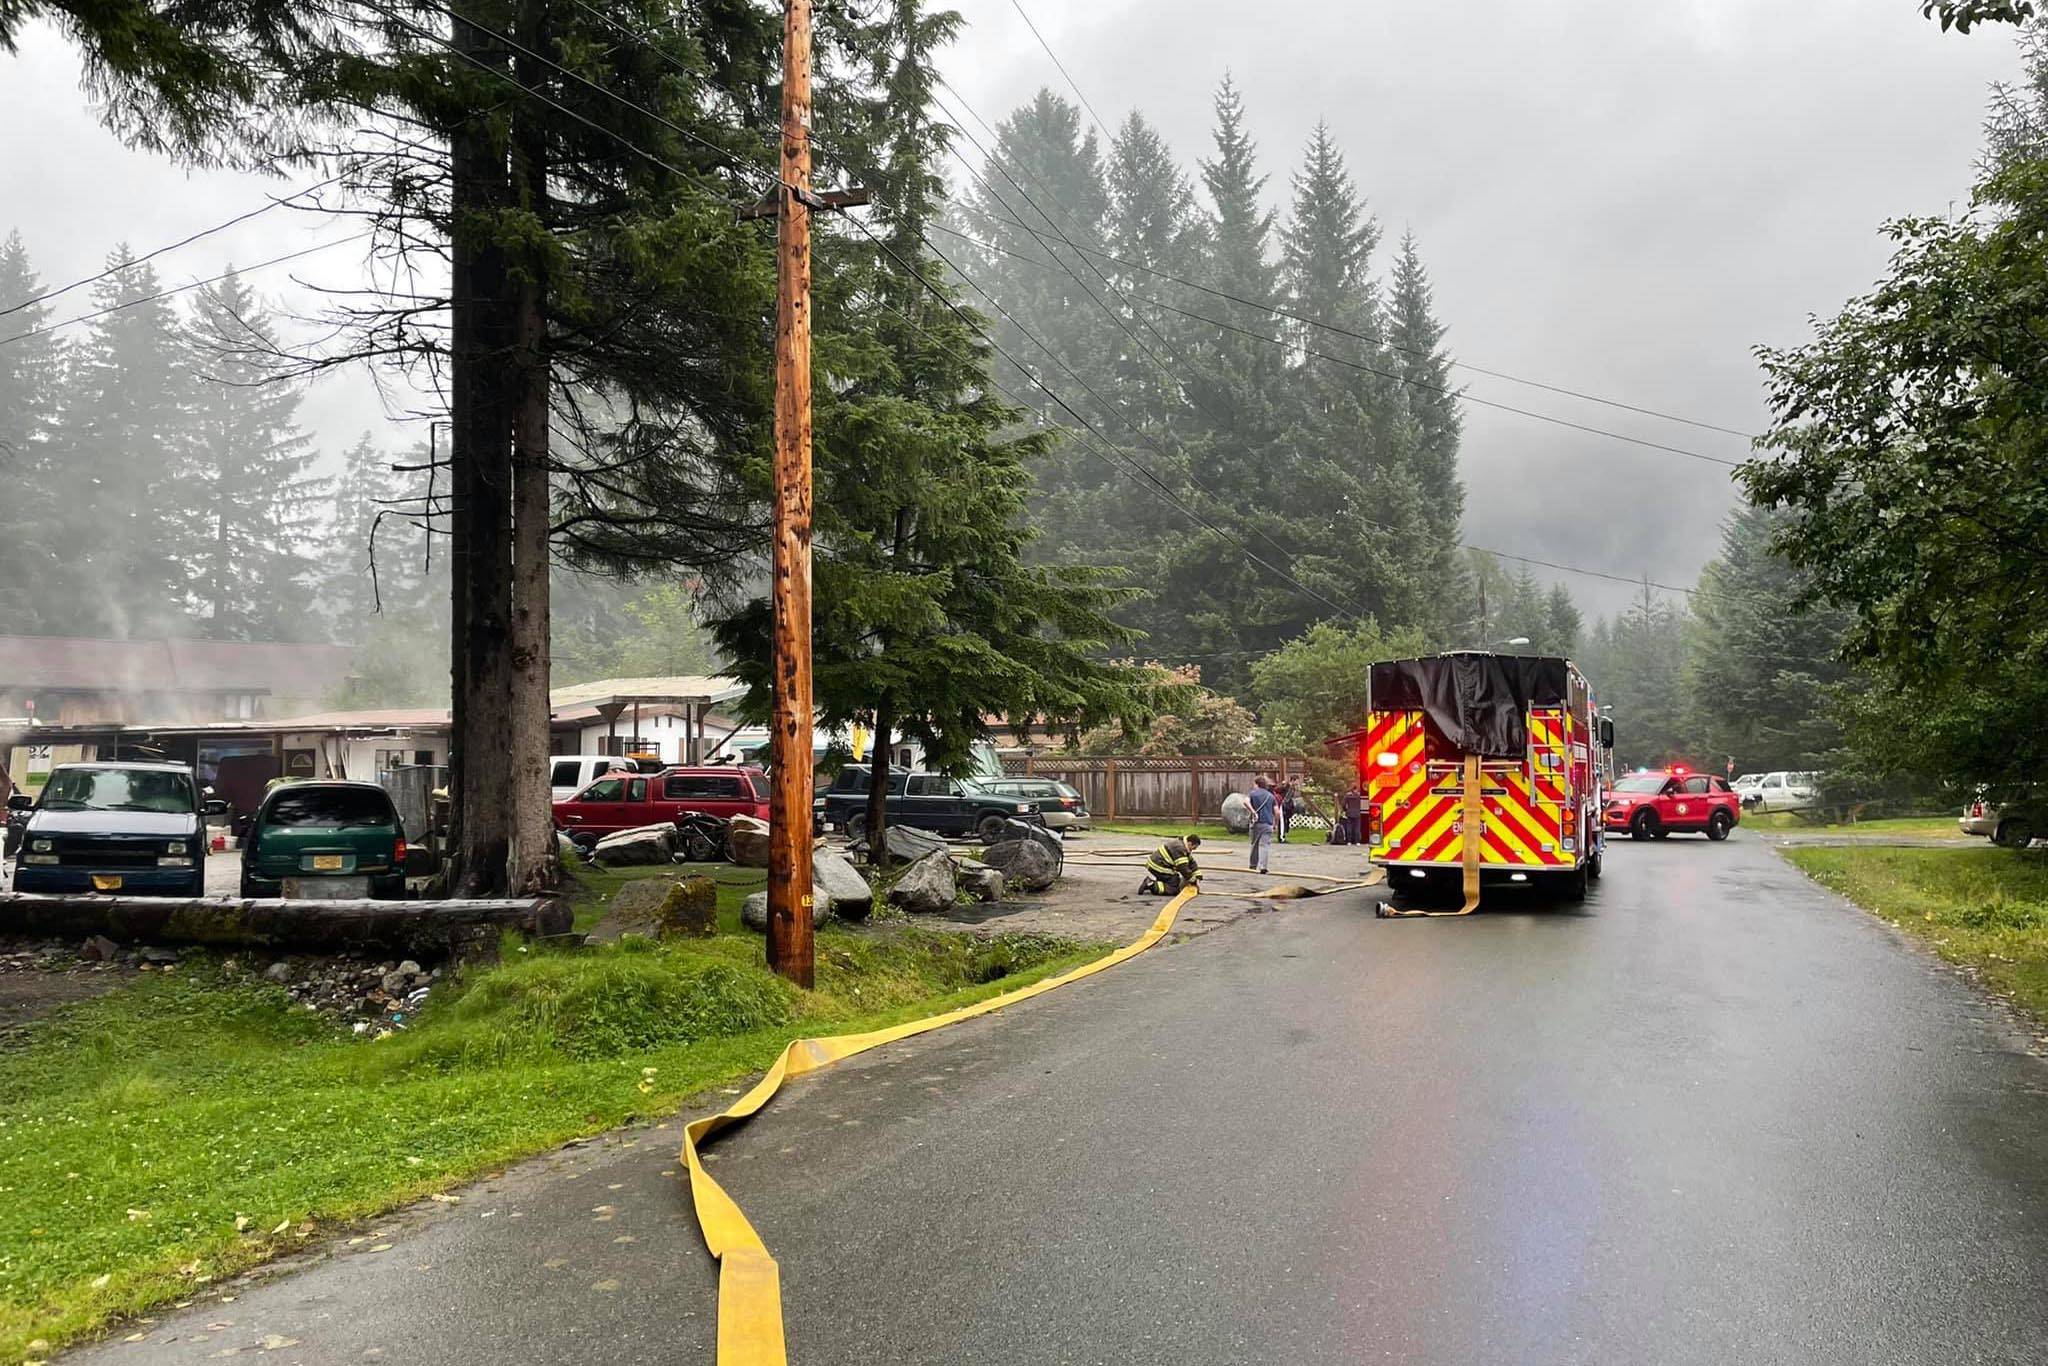 Capital City Fire/Rescue extinguished a fire at a residence in the Mendenhall Valley caused by a space heater igniting combustible materials on Sunday, Aug. 15, 2021. (Courtesy photo /CCFR)